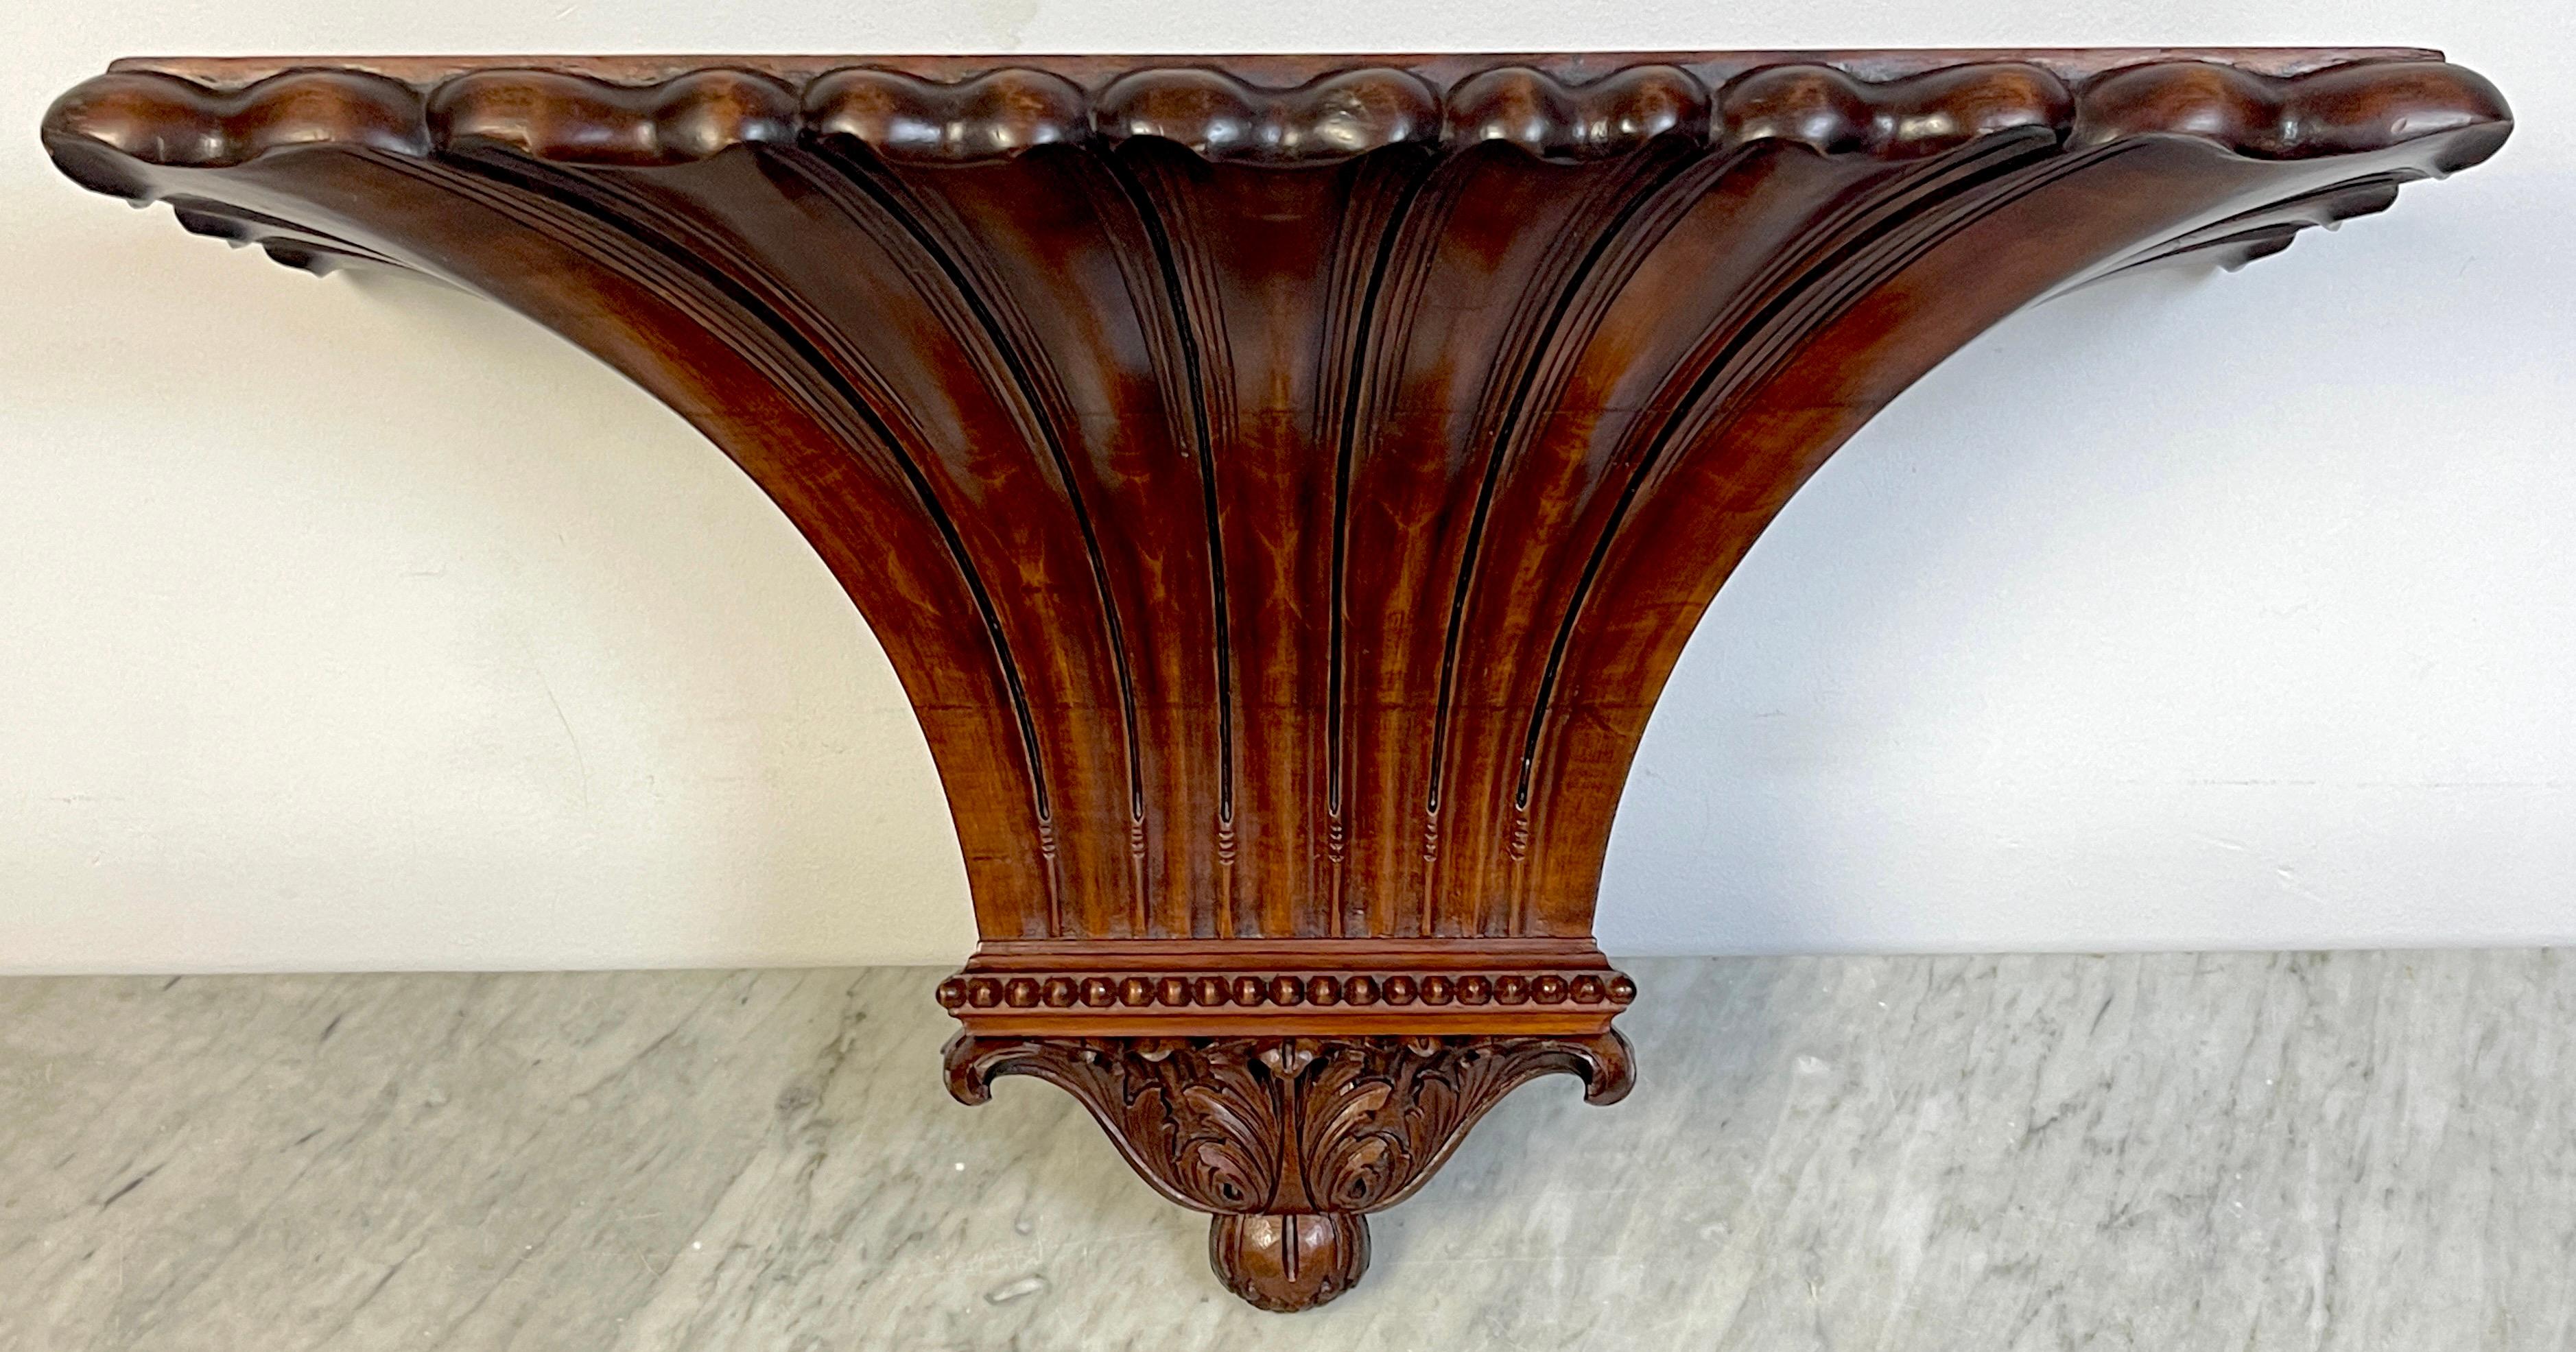 English Regency style plum pudding hardwood wall bracket/ shelf.
England, Circa 1900s.

A single substantial carved plum pudding hardwood wall bracket/shelf, large enough to hold a clock or sculpture. The flat top display shelf measures 26-Inches